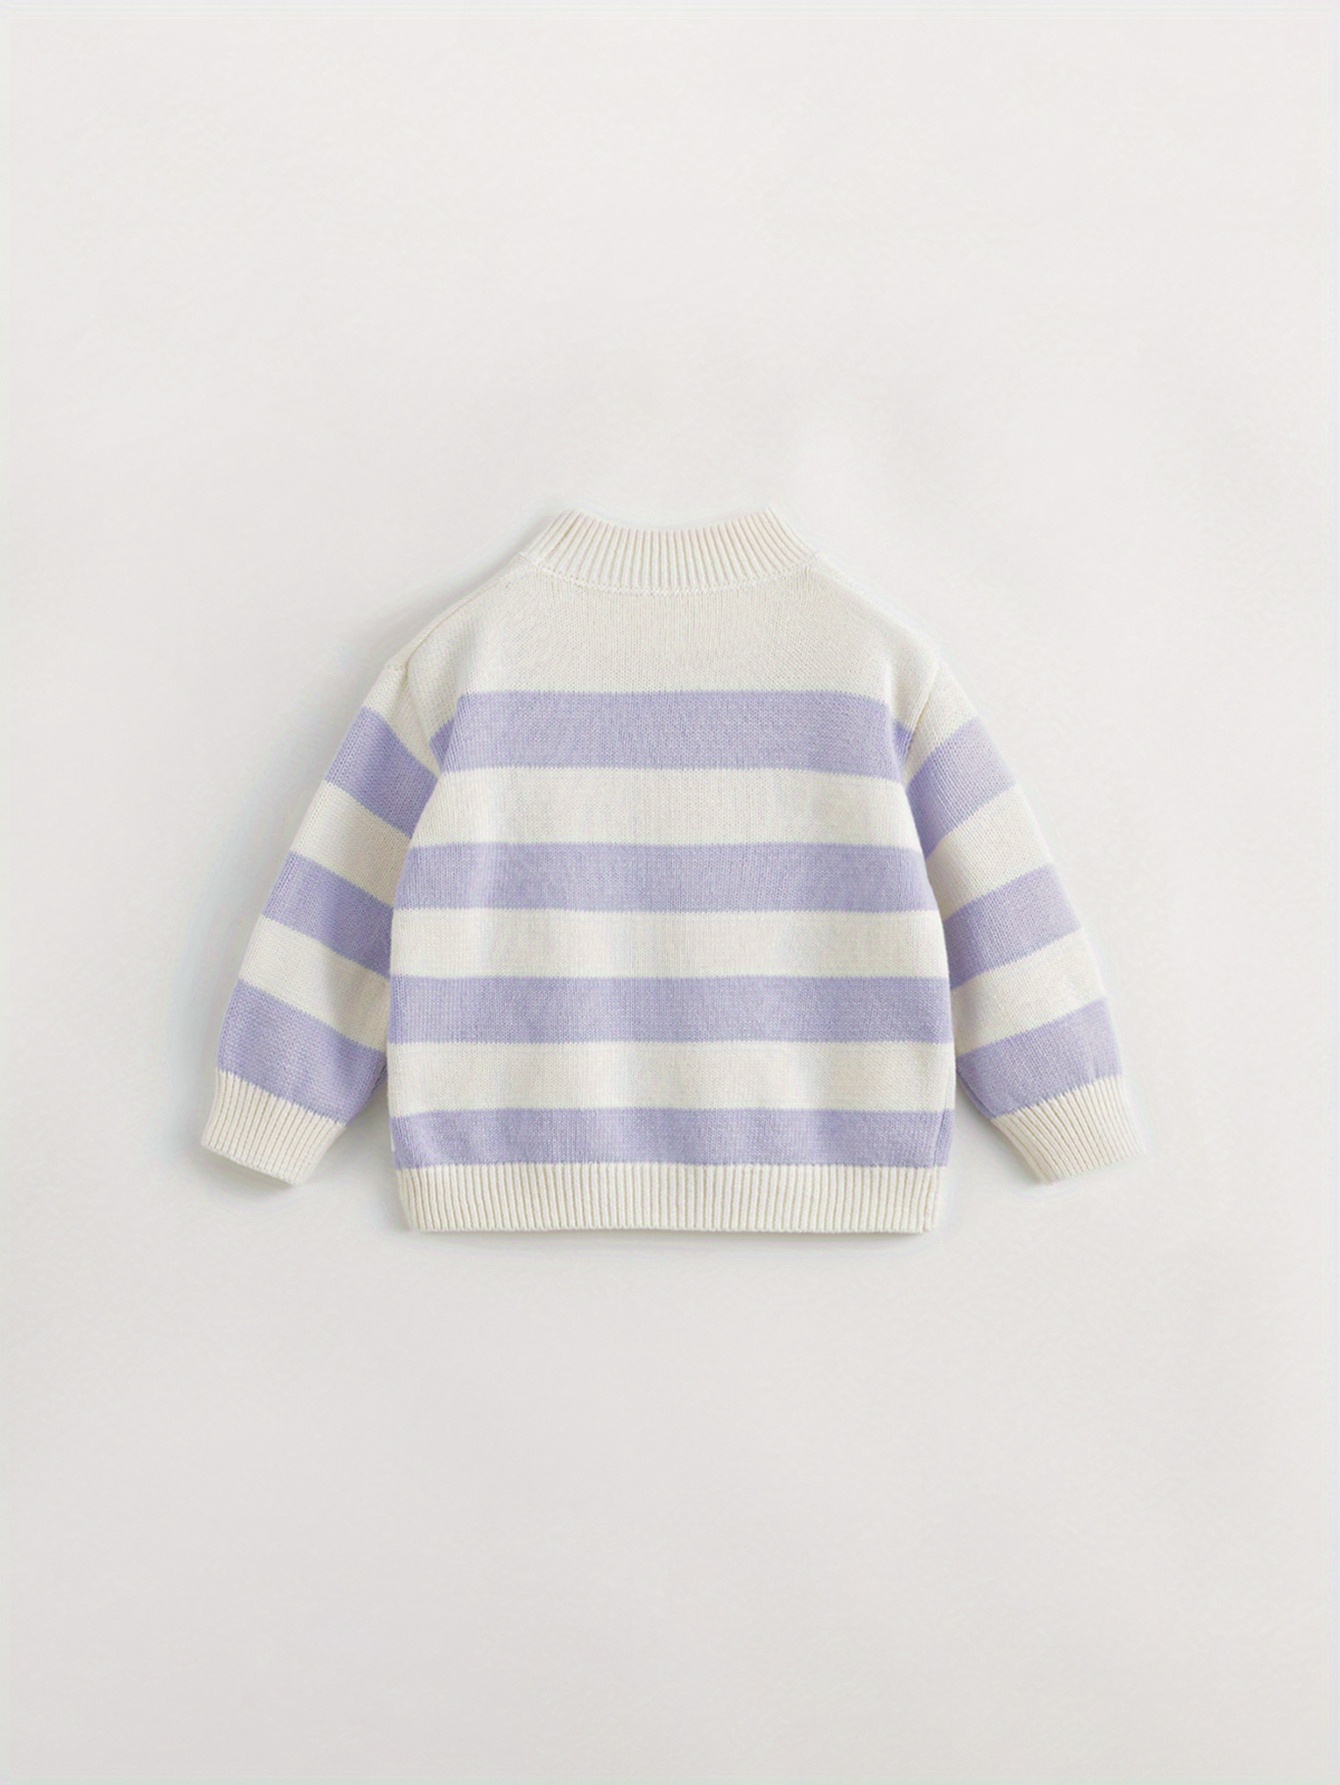 MARC&JANIE Girls Flower And Stripe Jacquard Knit Round Neck Knit Sweater  Tops For Kids, Autumn And Winter